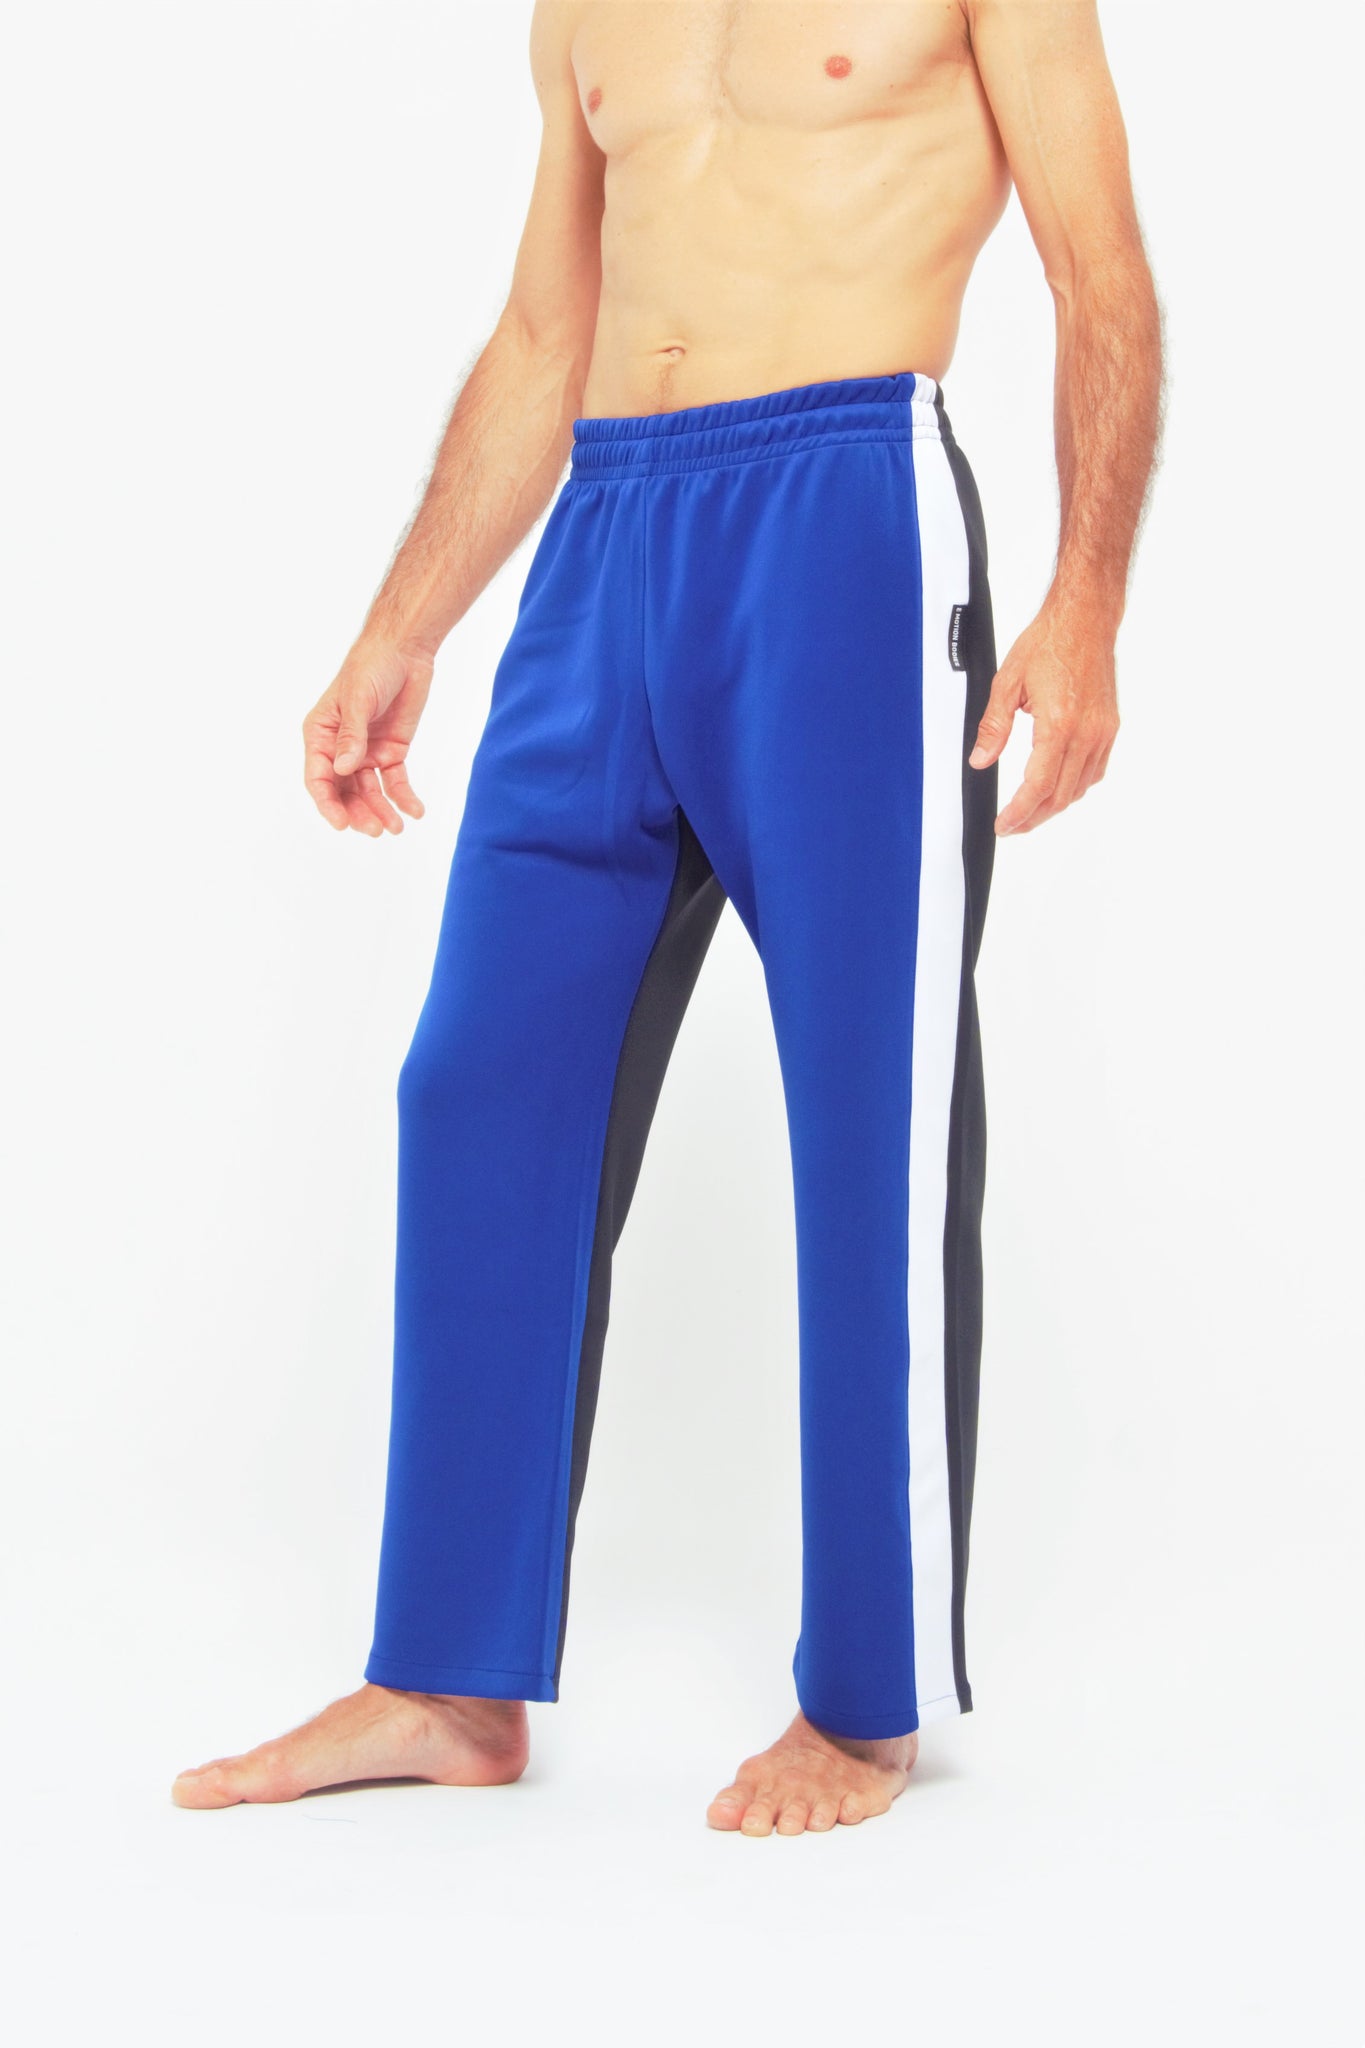 Flying Contemporary Dance Pants - Black & Blue